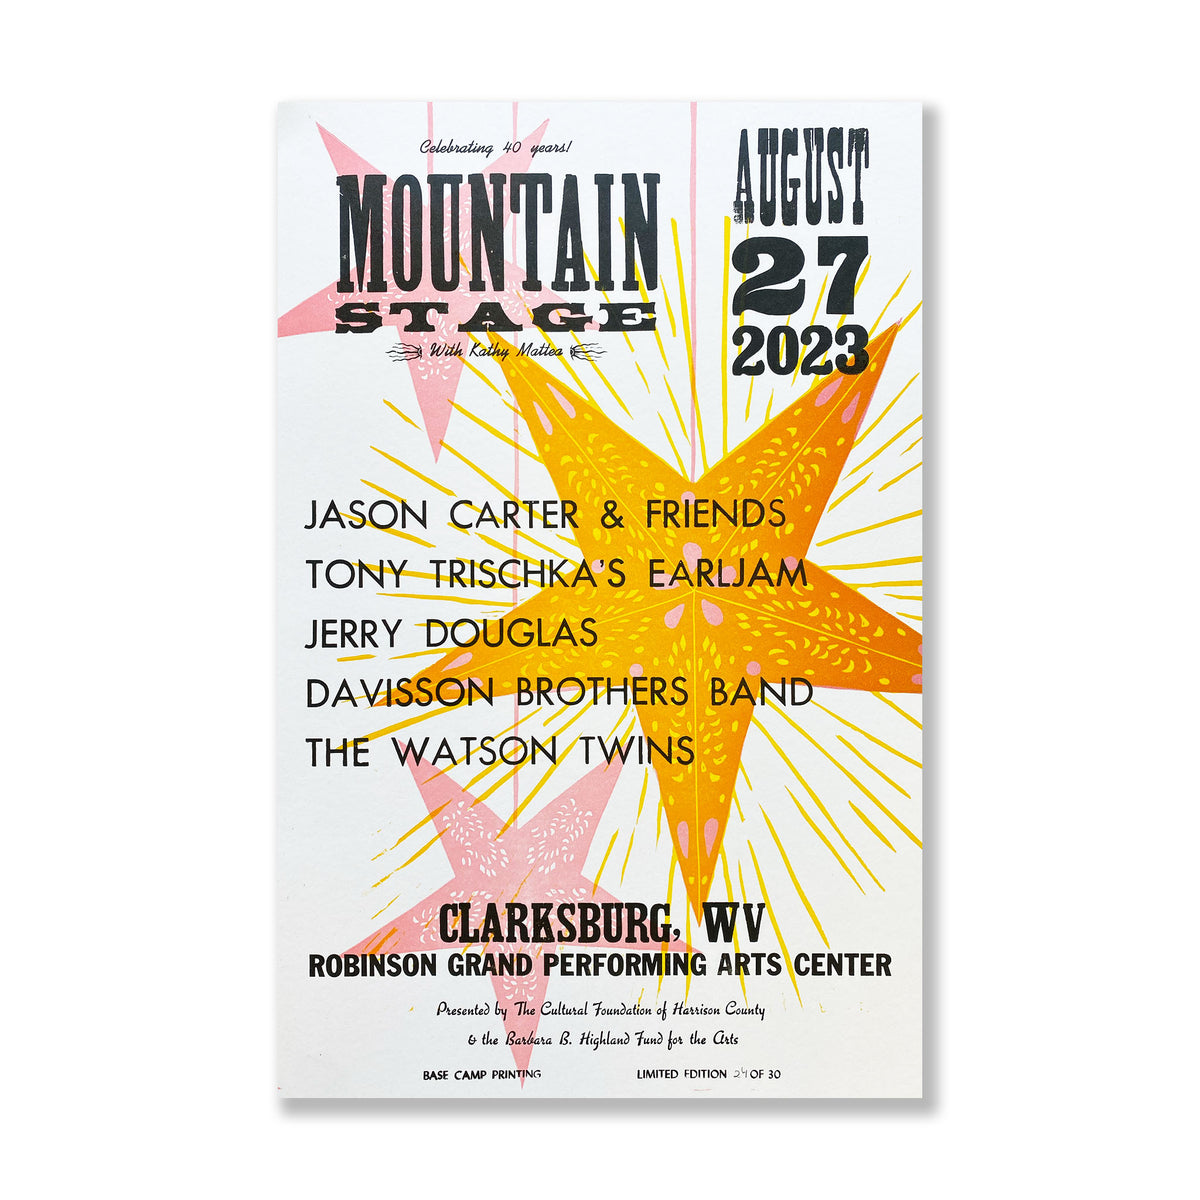 August 27, 2023 Mountain Stage Poster